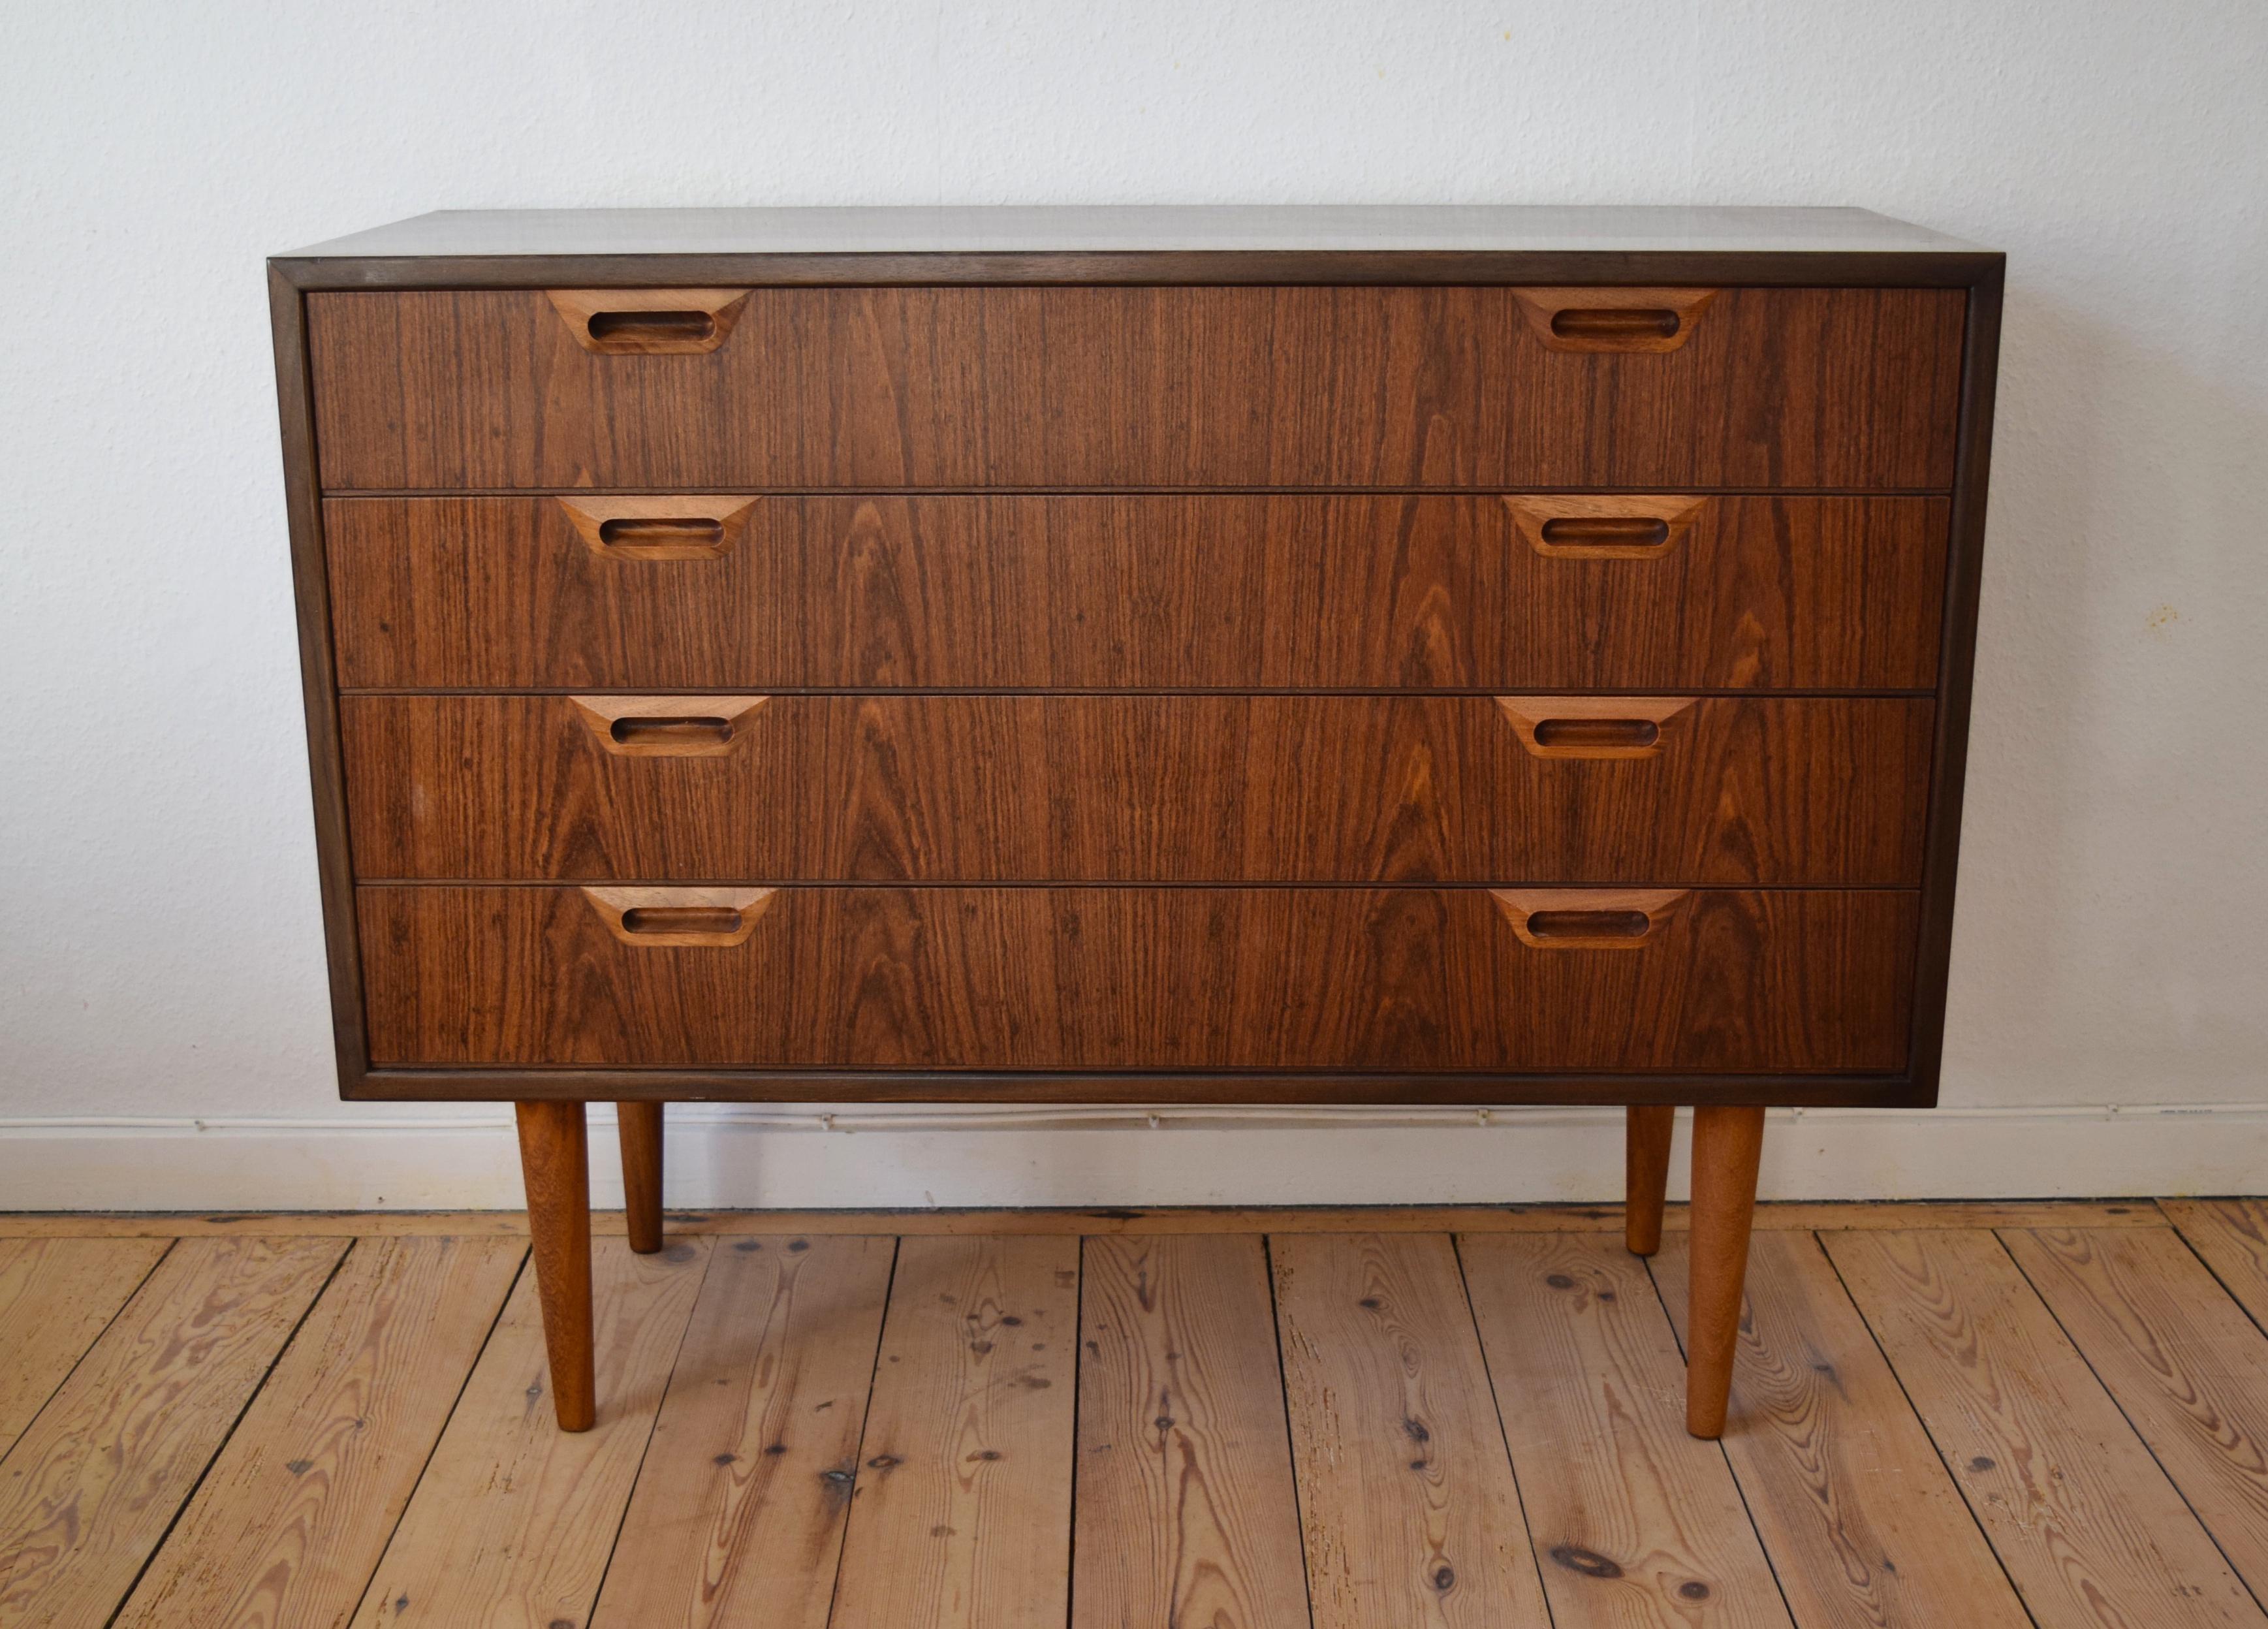 4-drawer rosewood chest of drawers manufactured in Denmark in the 1960s. Features drawers with inset handles and matched rosewood grain. Very few marks. Sits on tapered splayed legs.
 